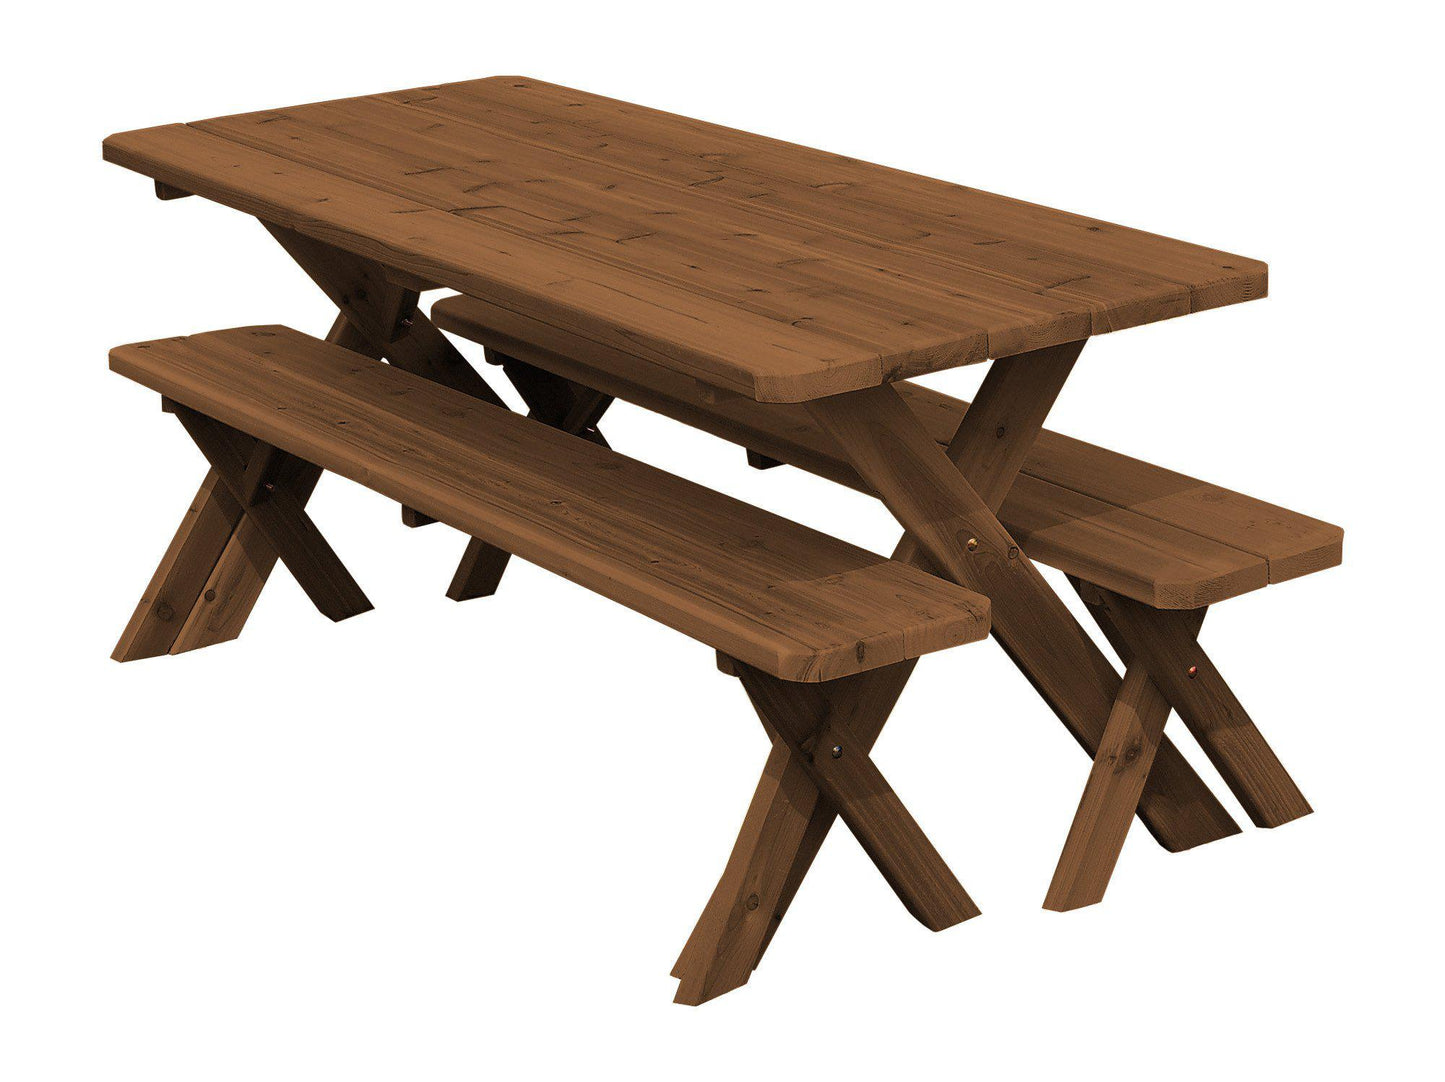 A&L FURNITURE CO. Western Red Cedar 94" Cross-leg Table w/2 Benches - Specify for FREE 2" Umbrella Hole - LEAD TIME TO SHIP 2 WEEKS